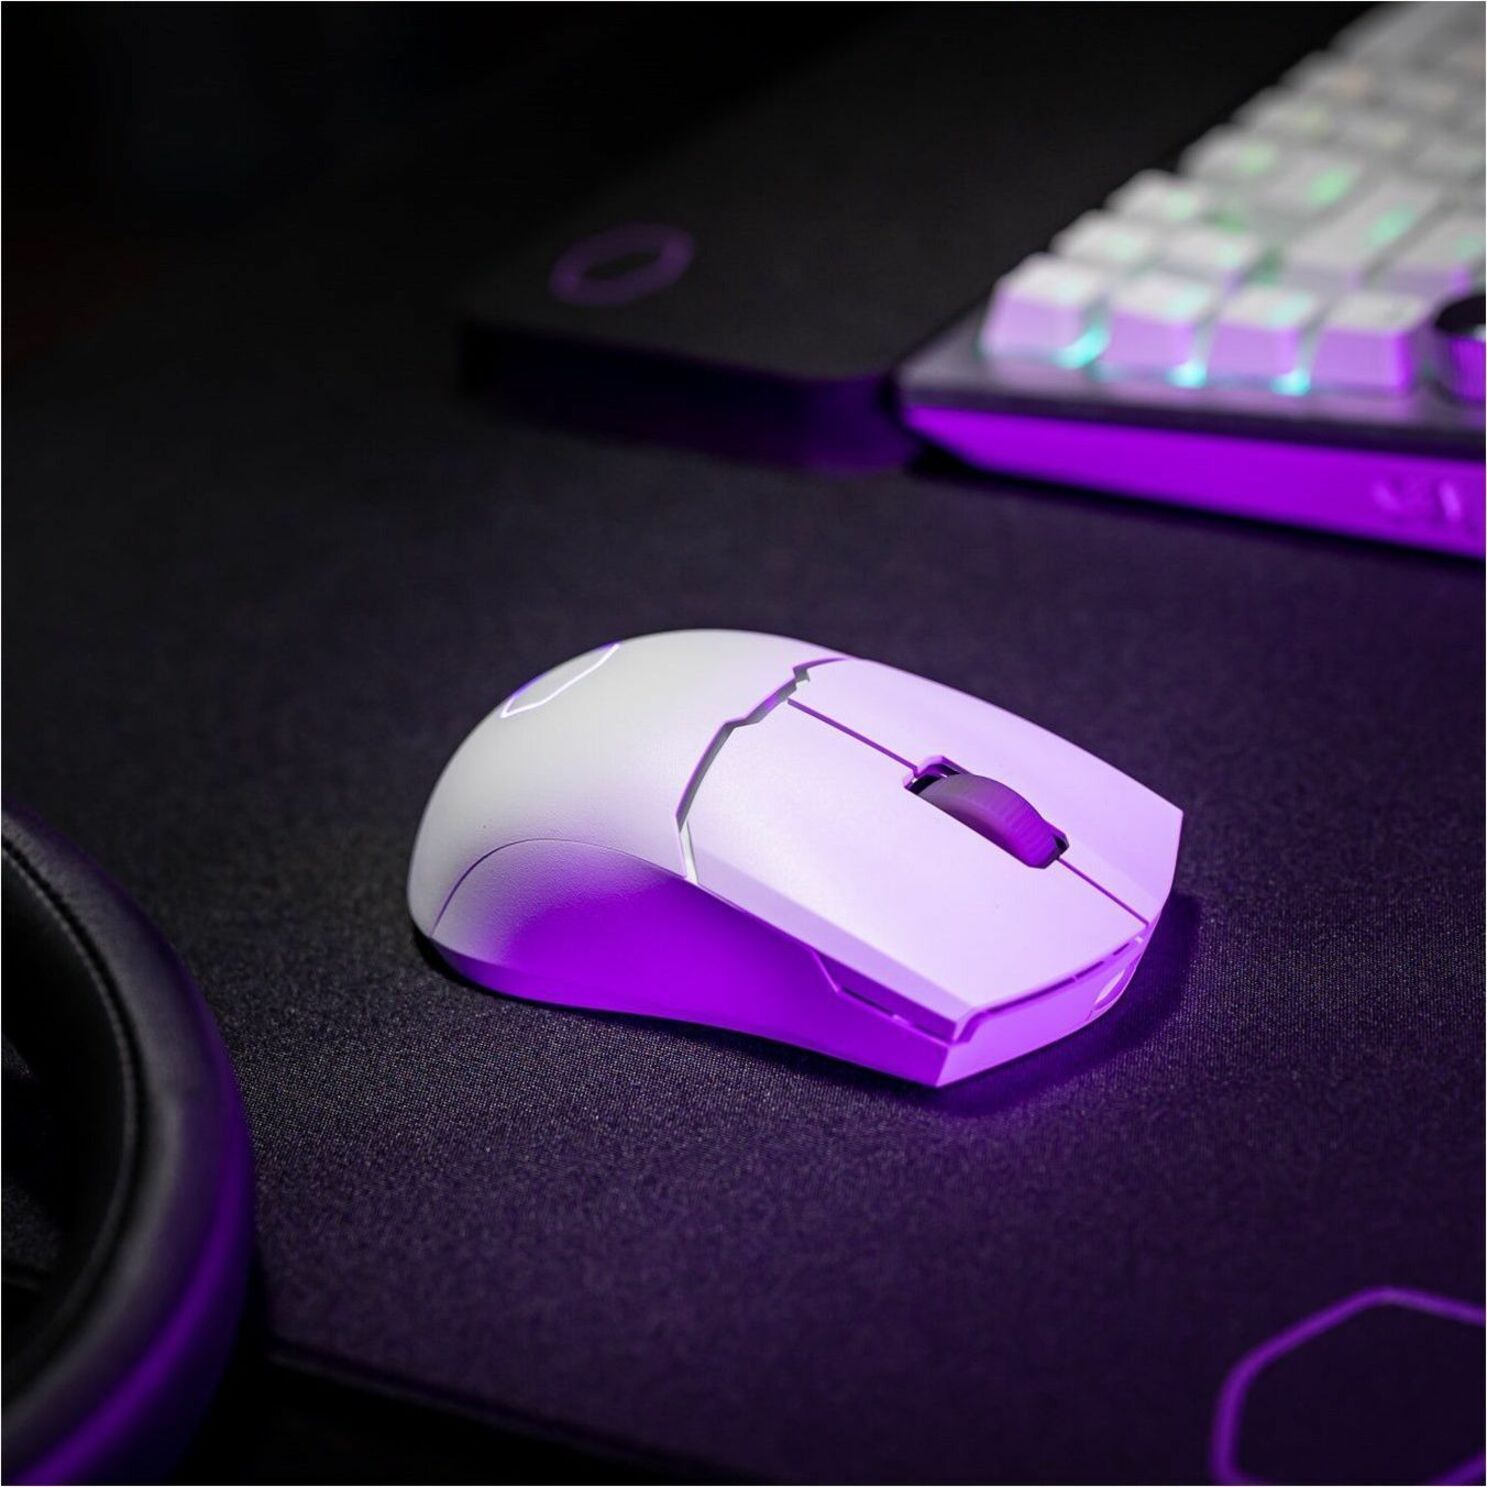 Cooler Master MM-712-WWOH1 MM712 Gaming Mouse, Rechargeable, 19000 dpi, Bluetooth 5.1, White